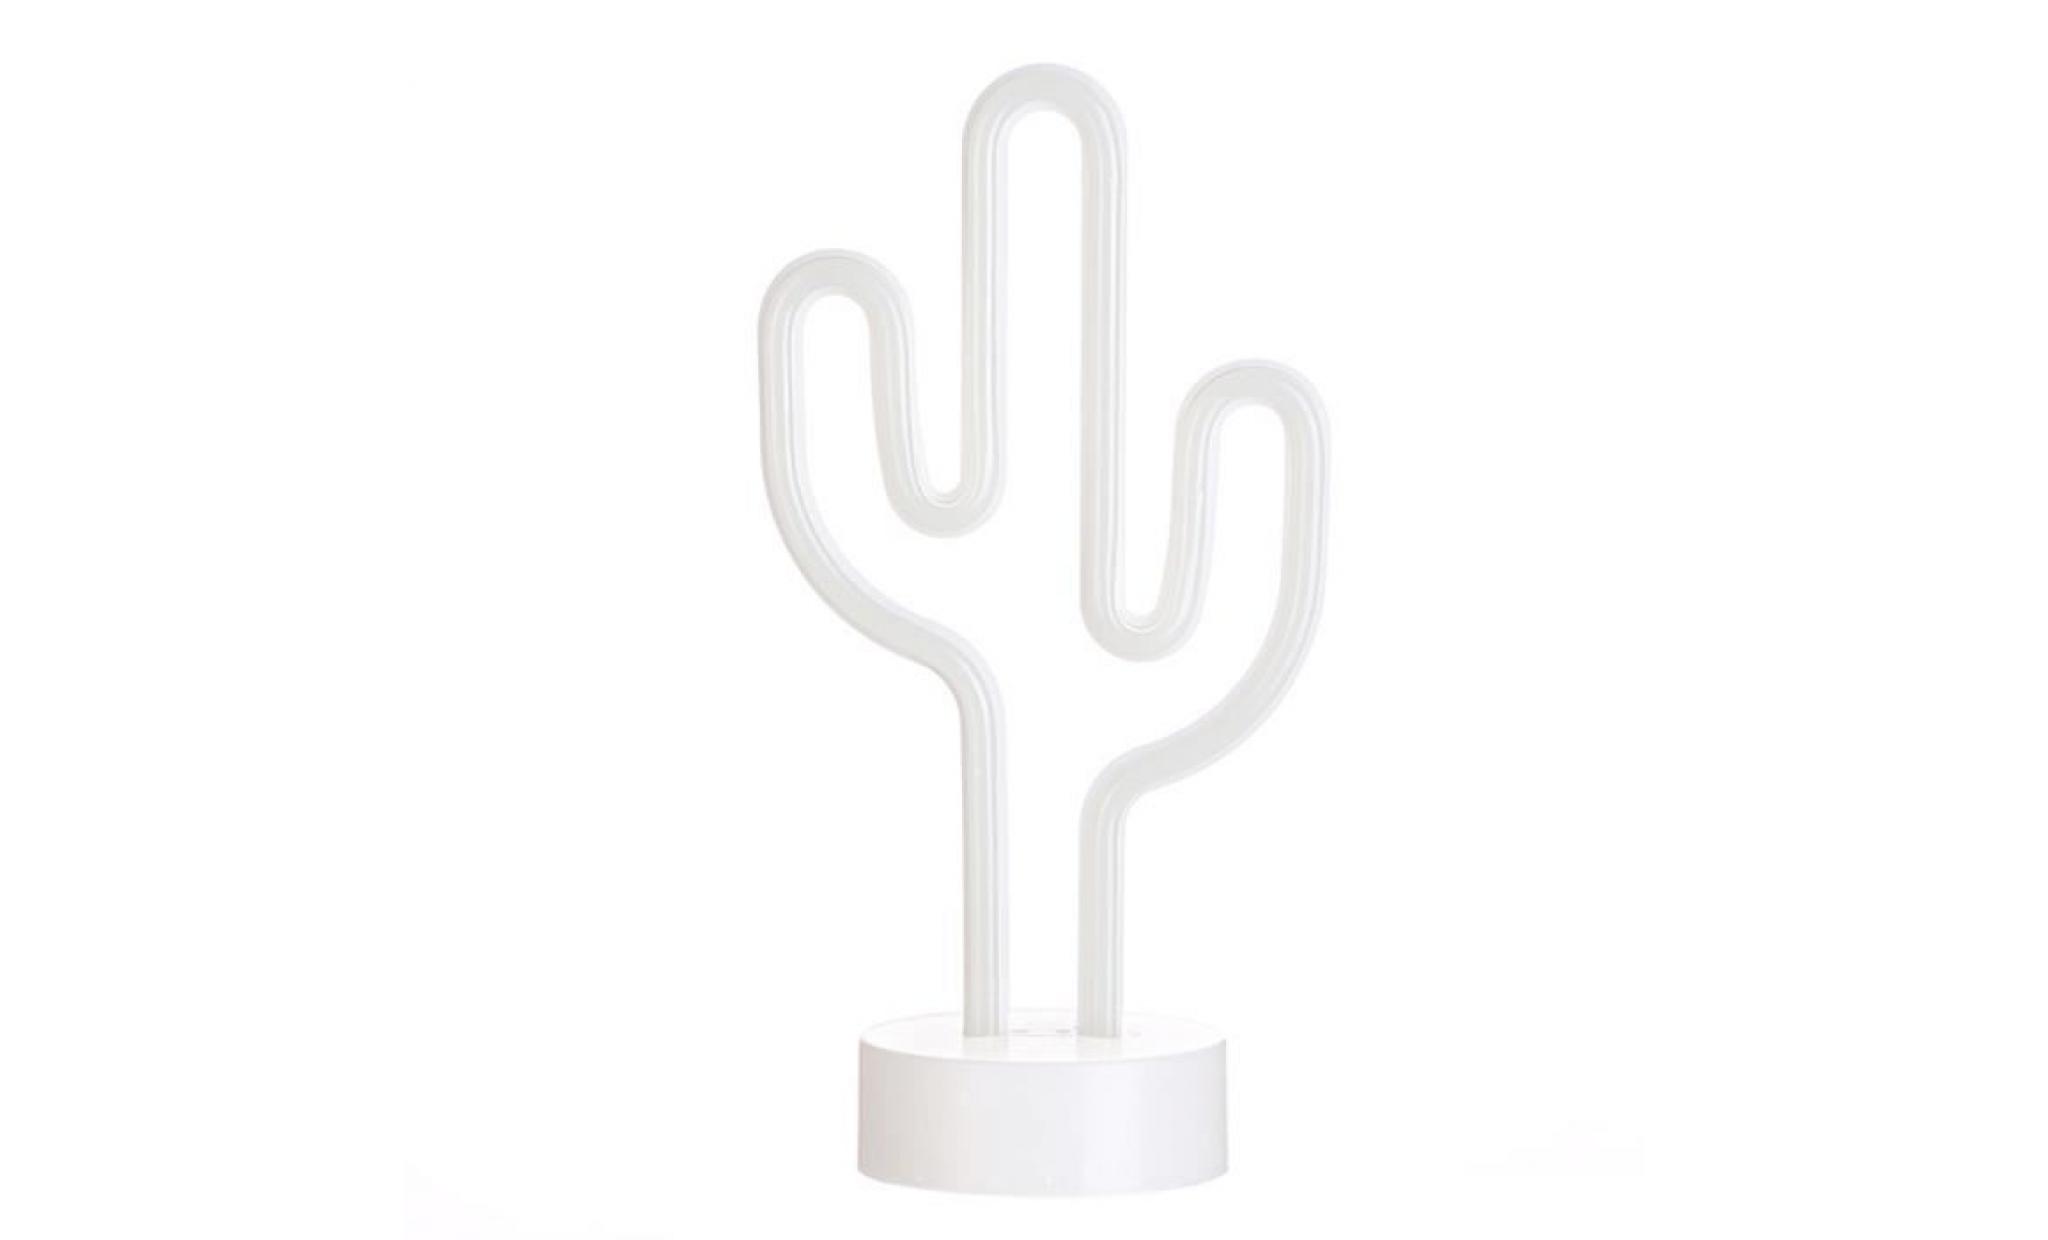 marquee led night light chambre cactus home décor batterie lampe mur_led2422